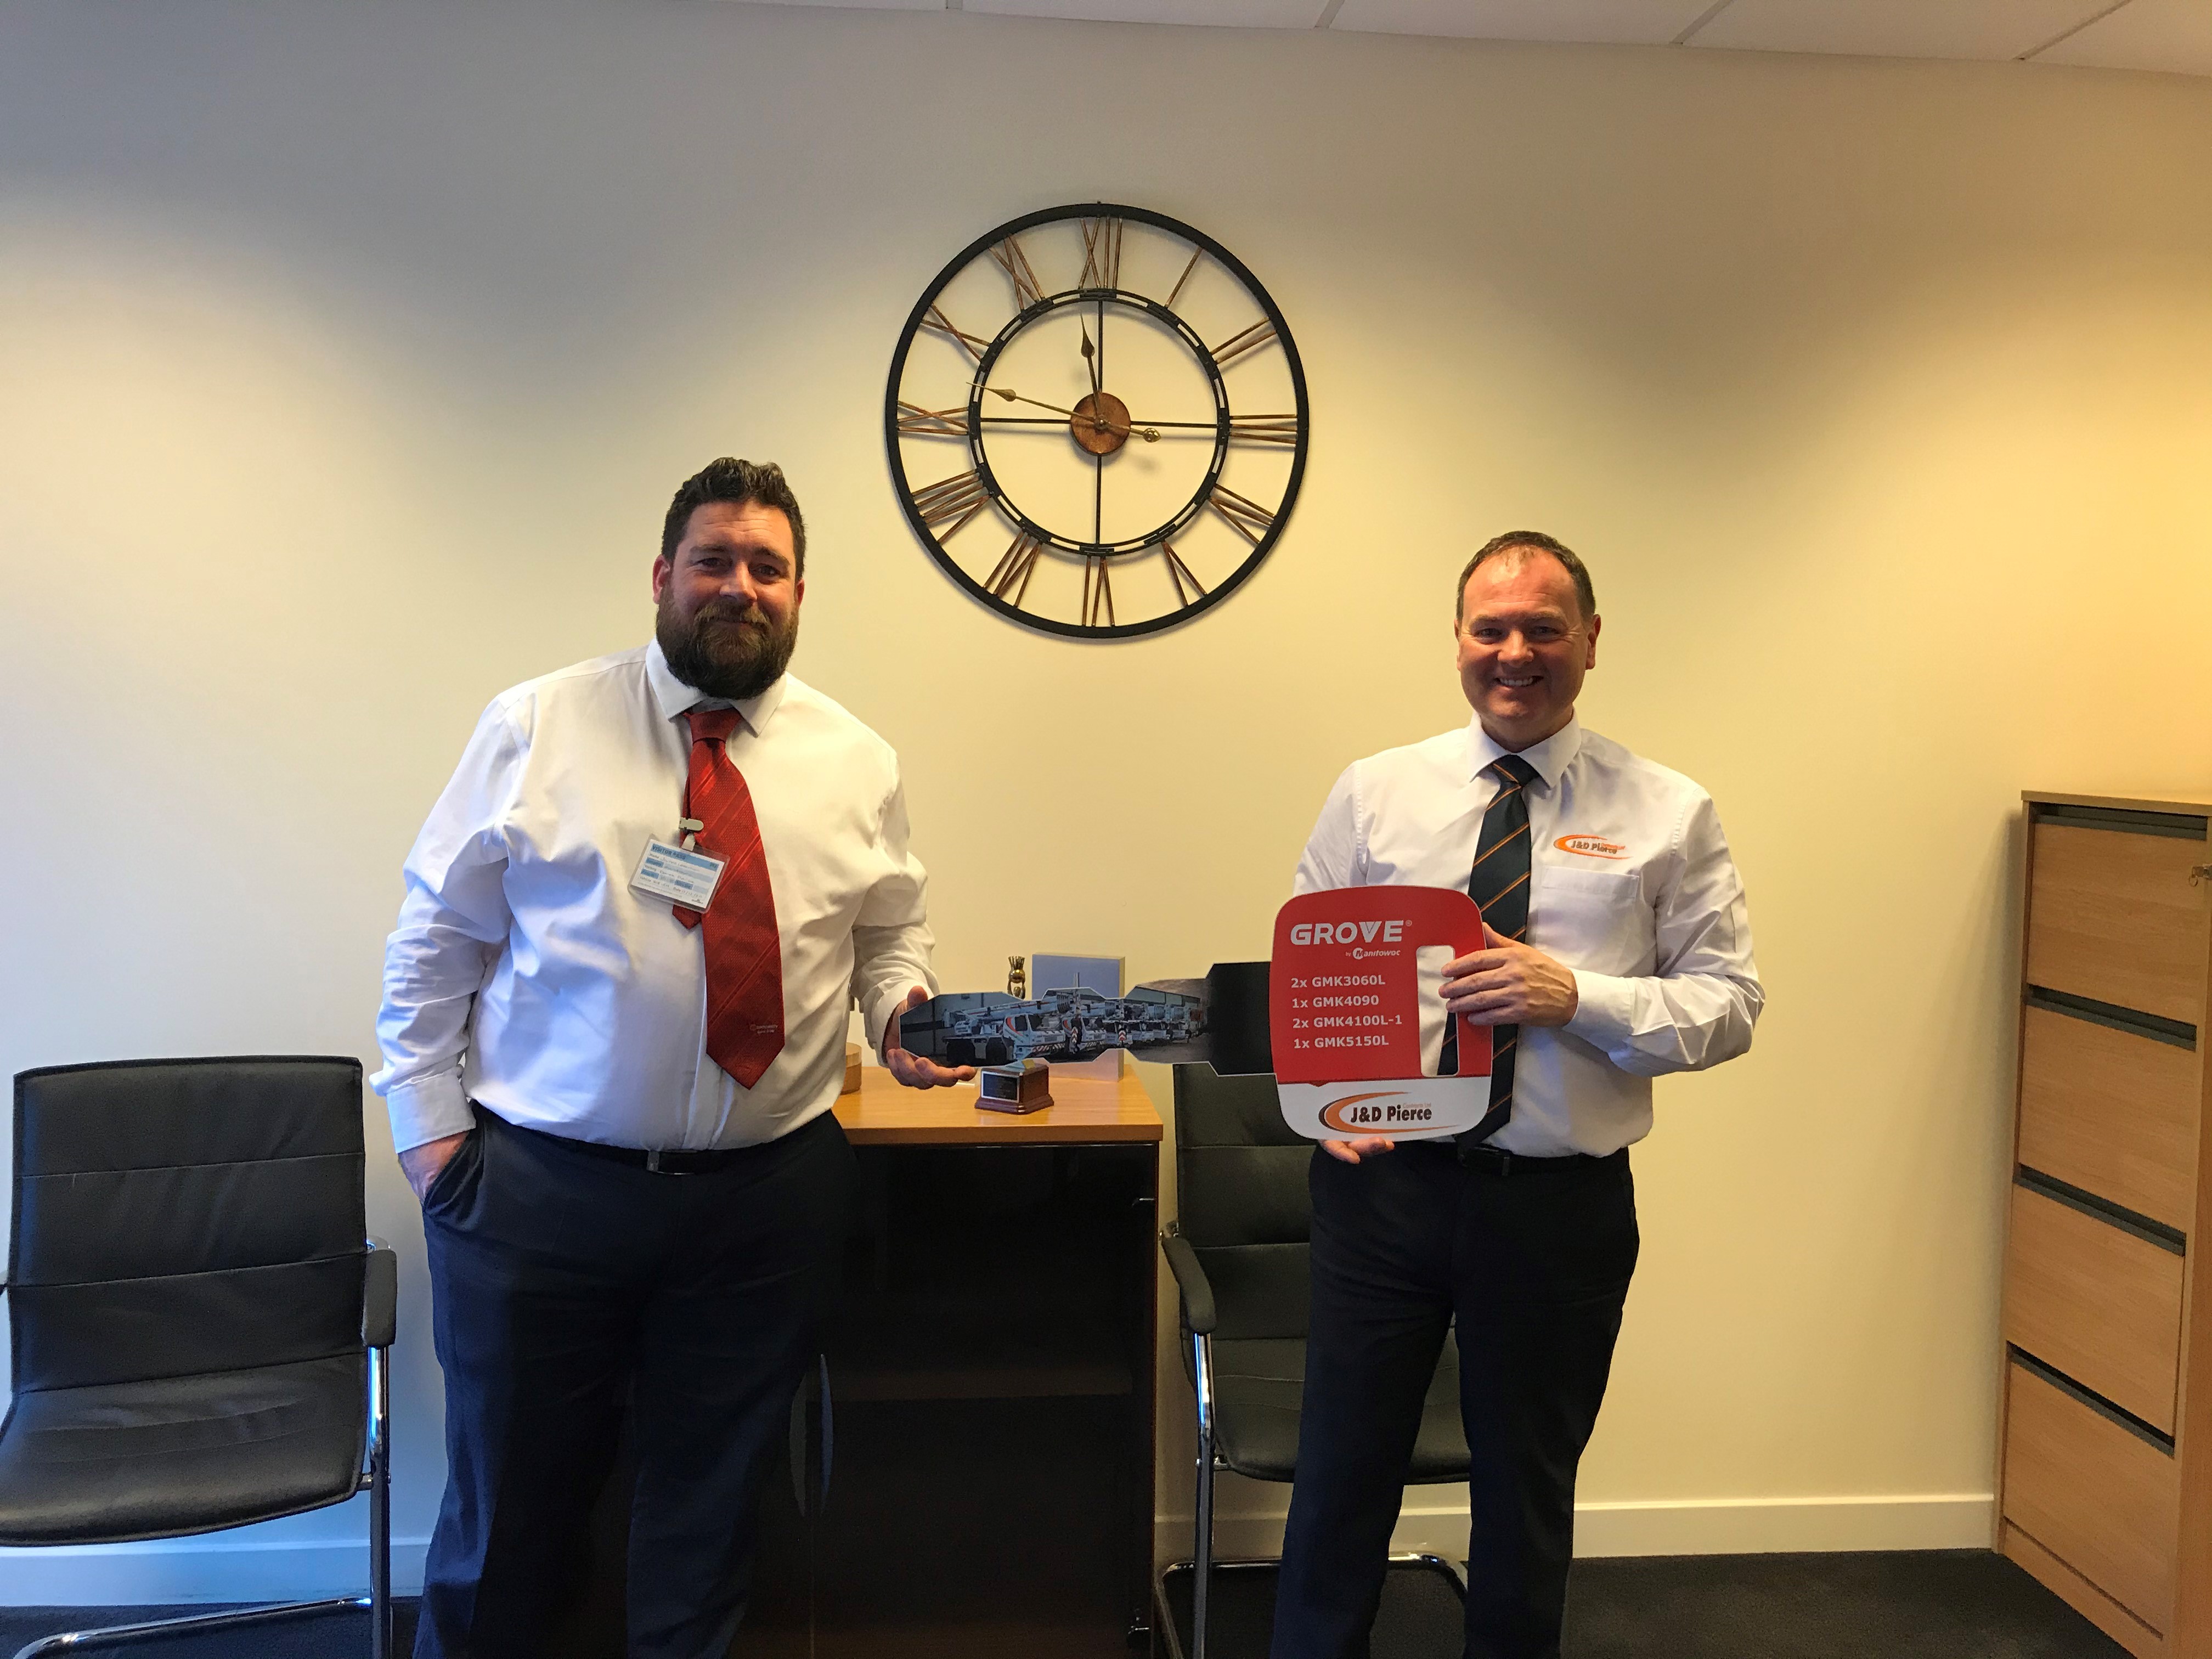 James Leishman, sales manager at Manitowoc UK, presents Derek Pierce, managing director of J & D Pierce, with a ceremonial key representing the handover of the cranes.